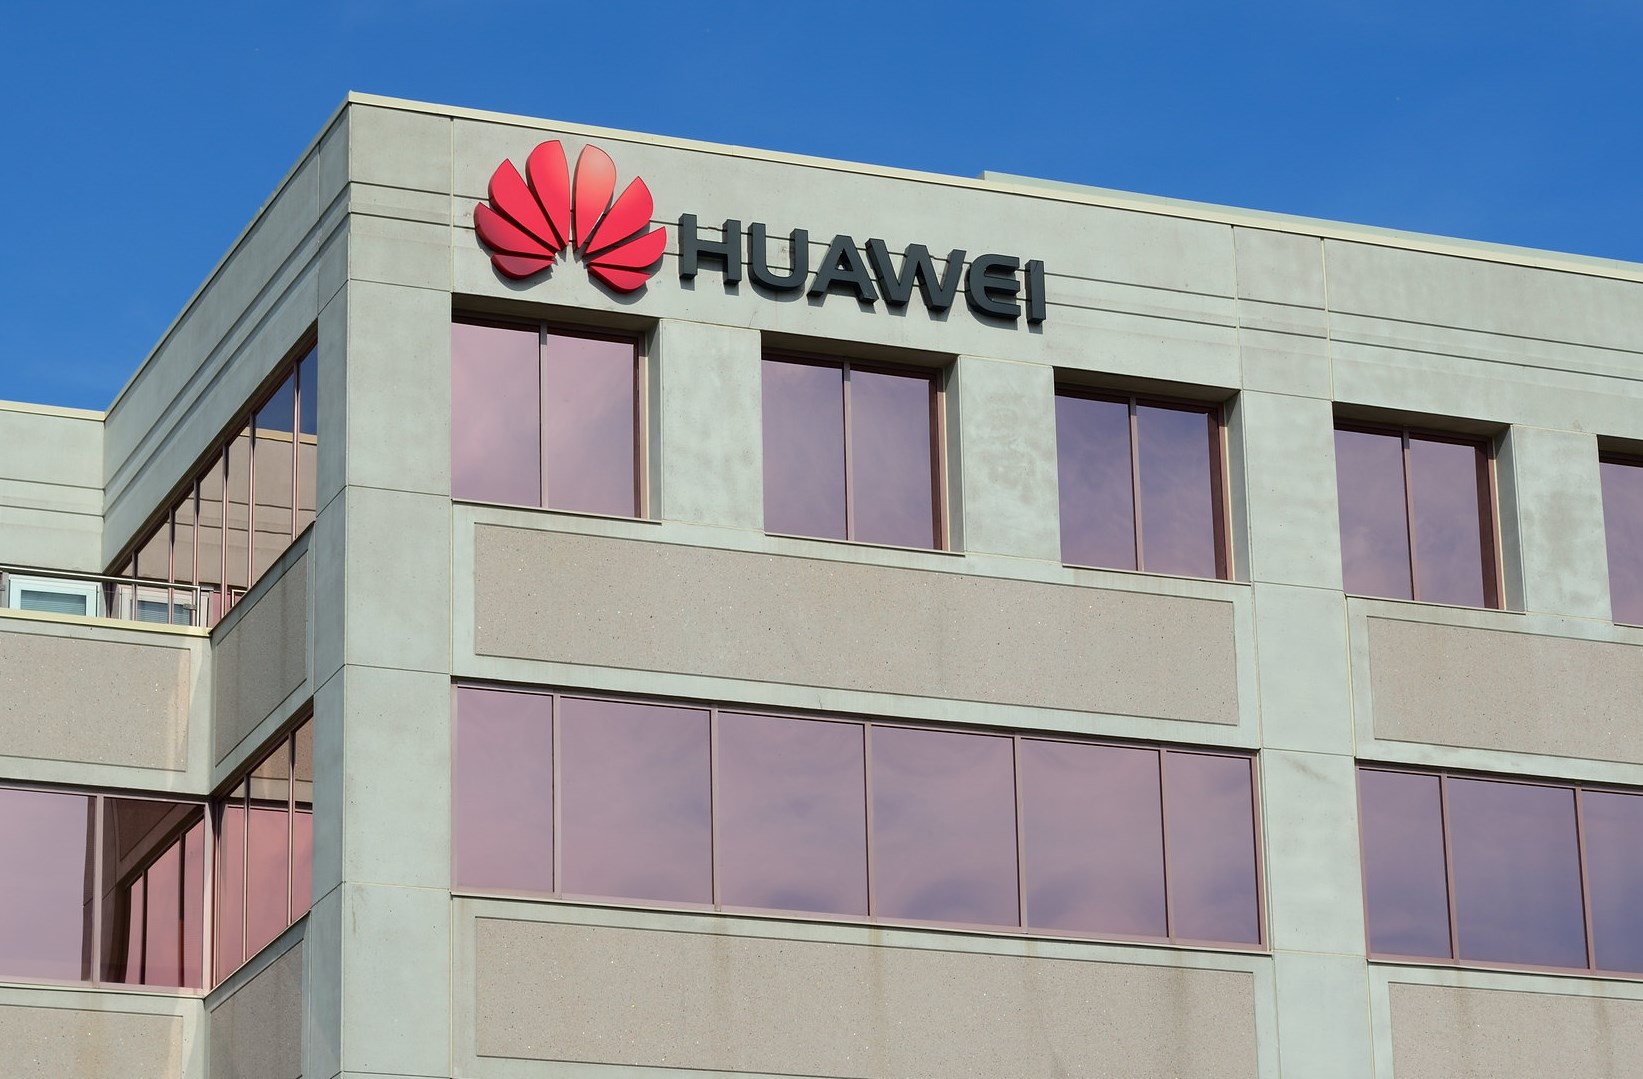 Google Reportedly Revokes Huawei’s Access To Android Hardware, Software, and Technical Services